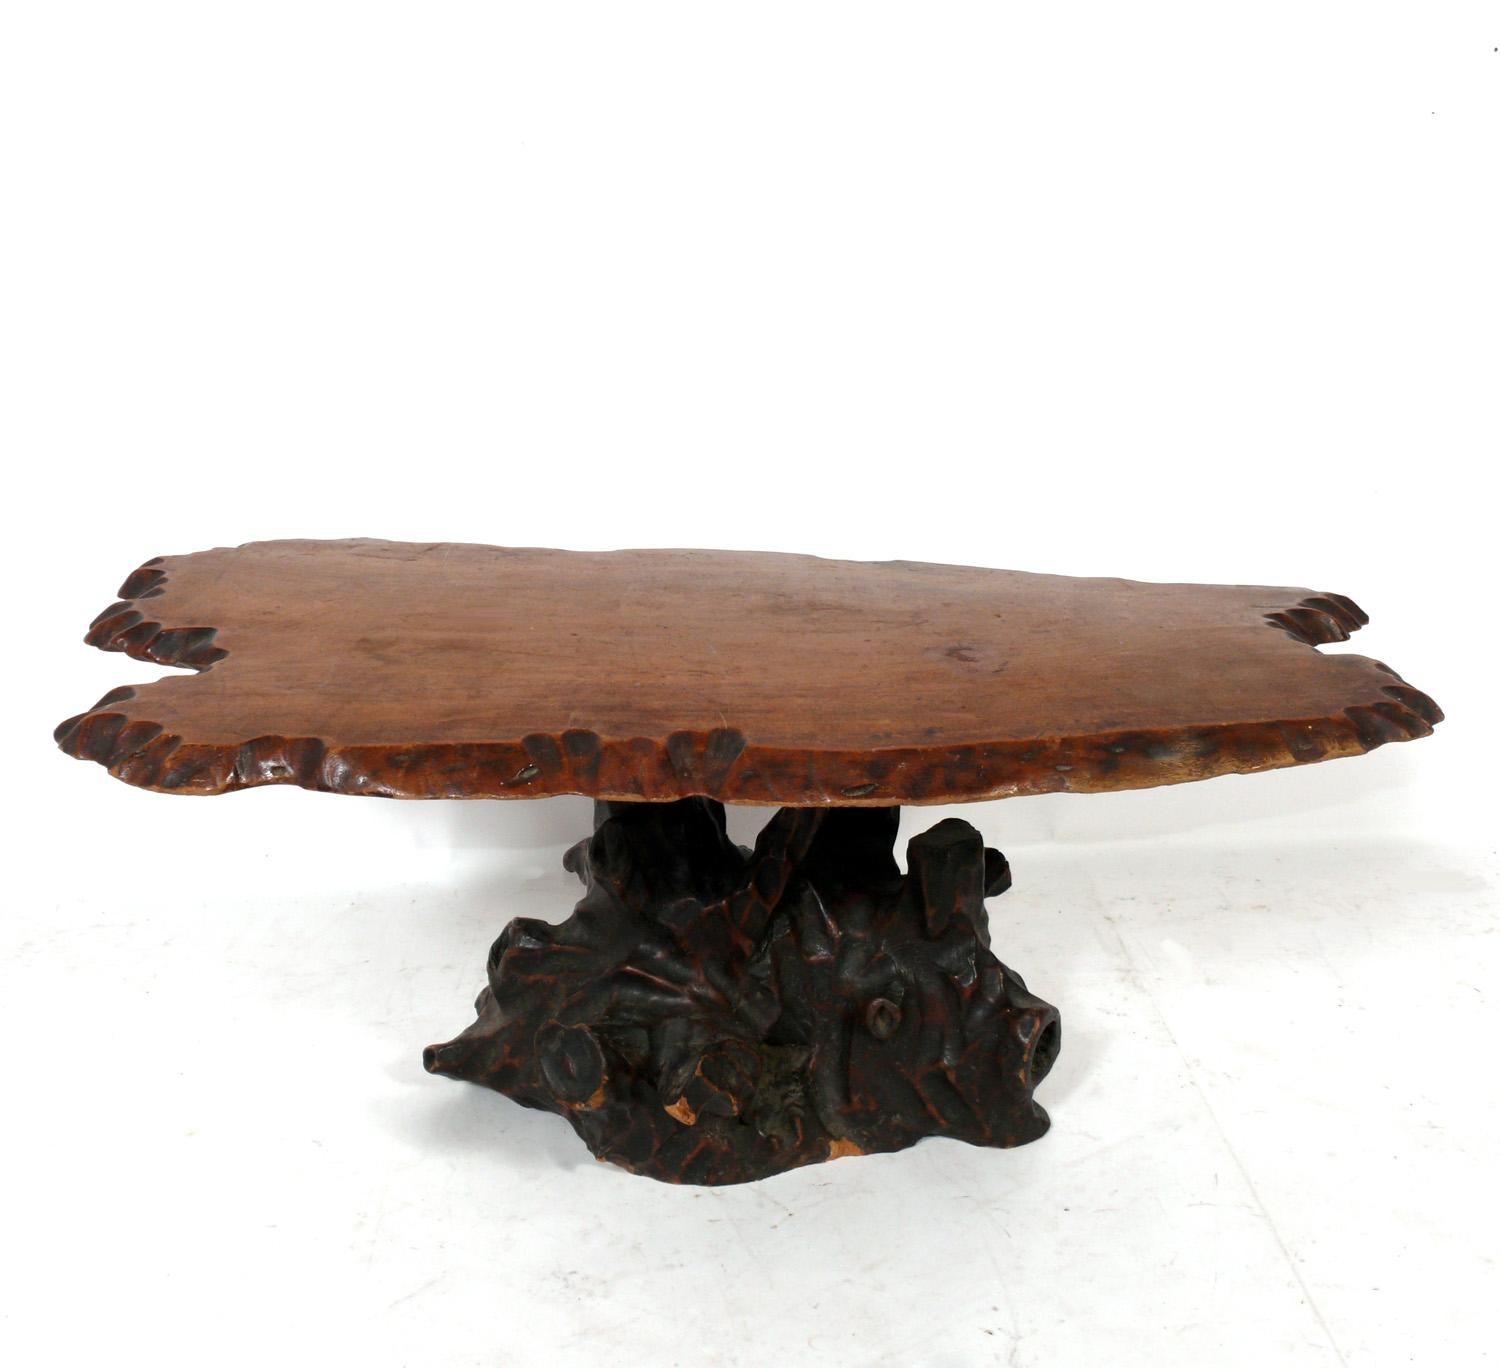 Organic hand made Japanese wood coffee table, Japan, circa 1950s. Constructed of a wood slab top with a chip carved edge and an organic root base. Retains warm original patina. Can be used as a coffee table or end table.